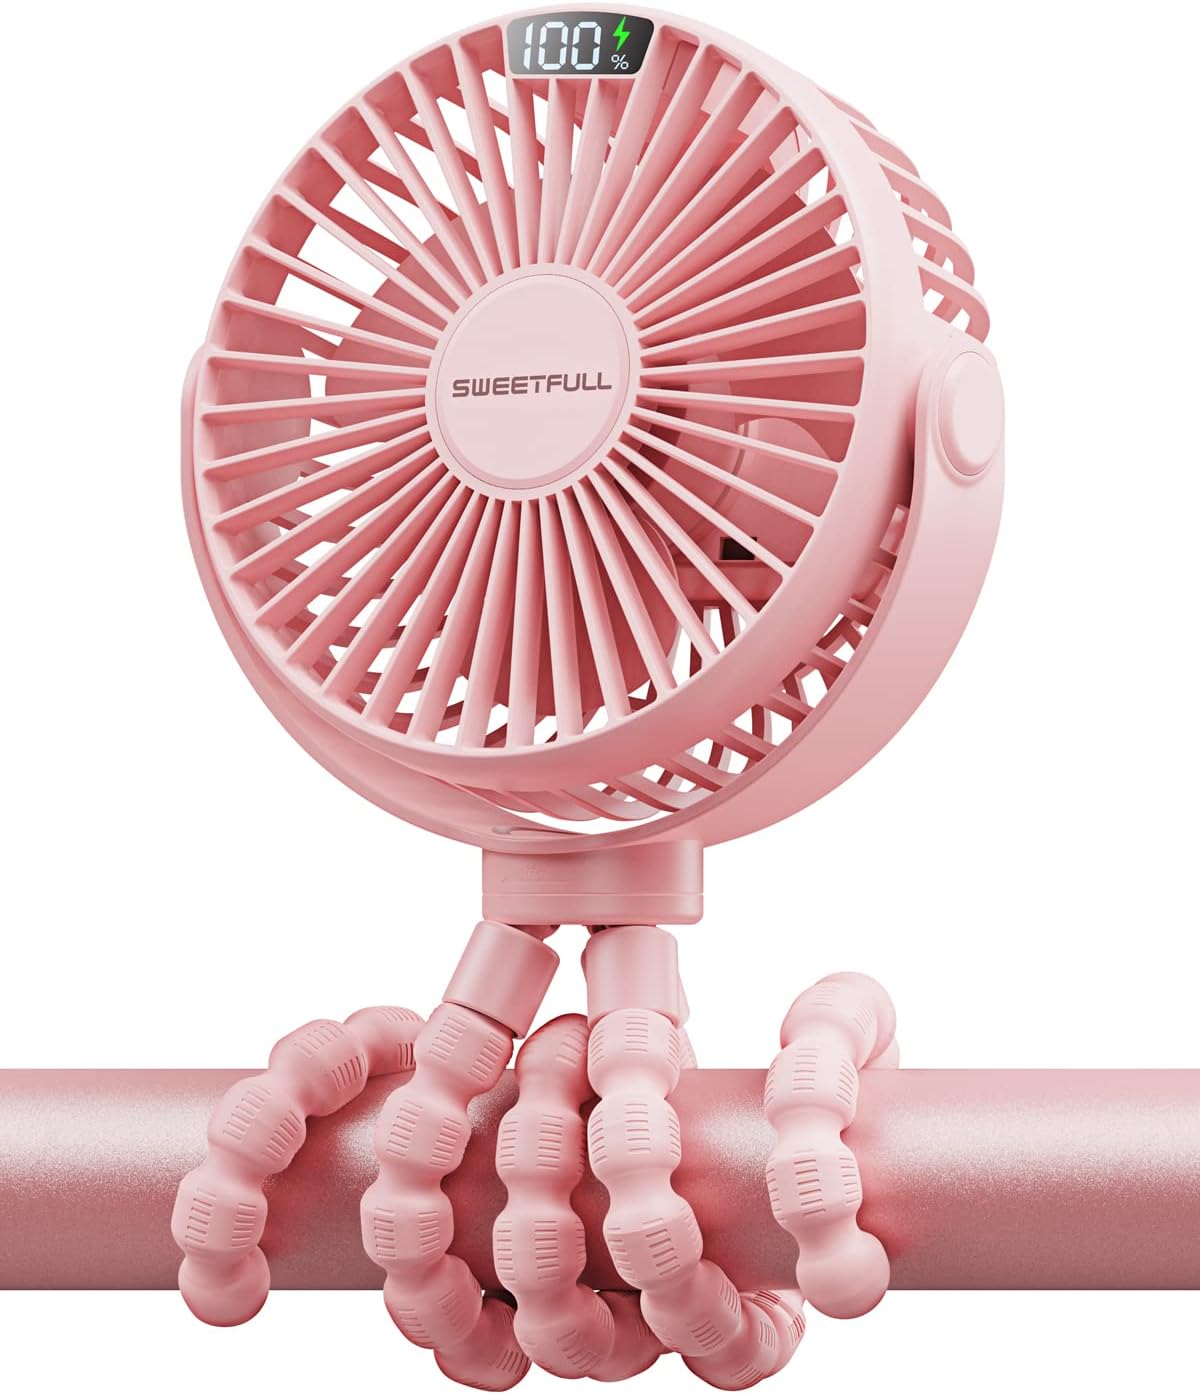 SWEETFULL Portable Stroller Fan, LED Display 6000mAh Battery Operated Mini Clip Fan, 4 Speed Rechargeable Small Personal Fan Handheld Desk Cooling Fan For Car Seat Crib Treadmill Travel(Pink)